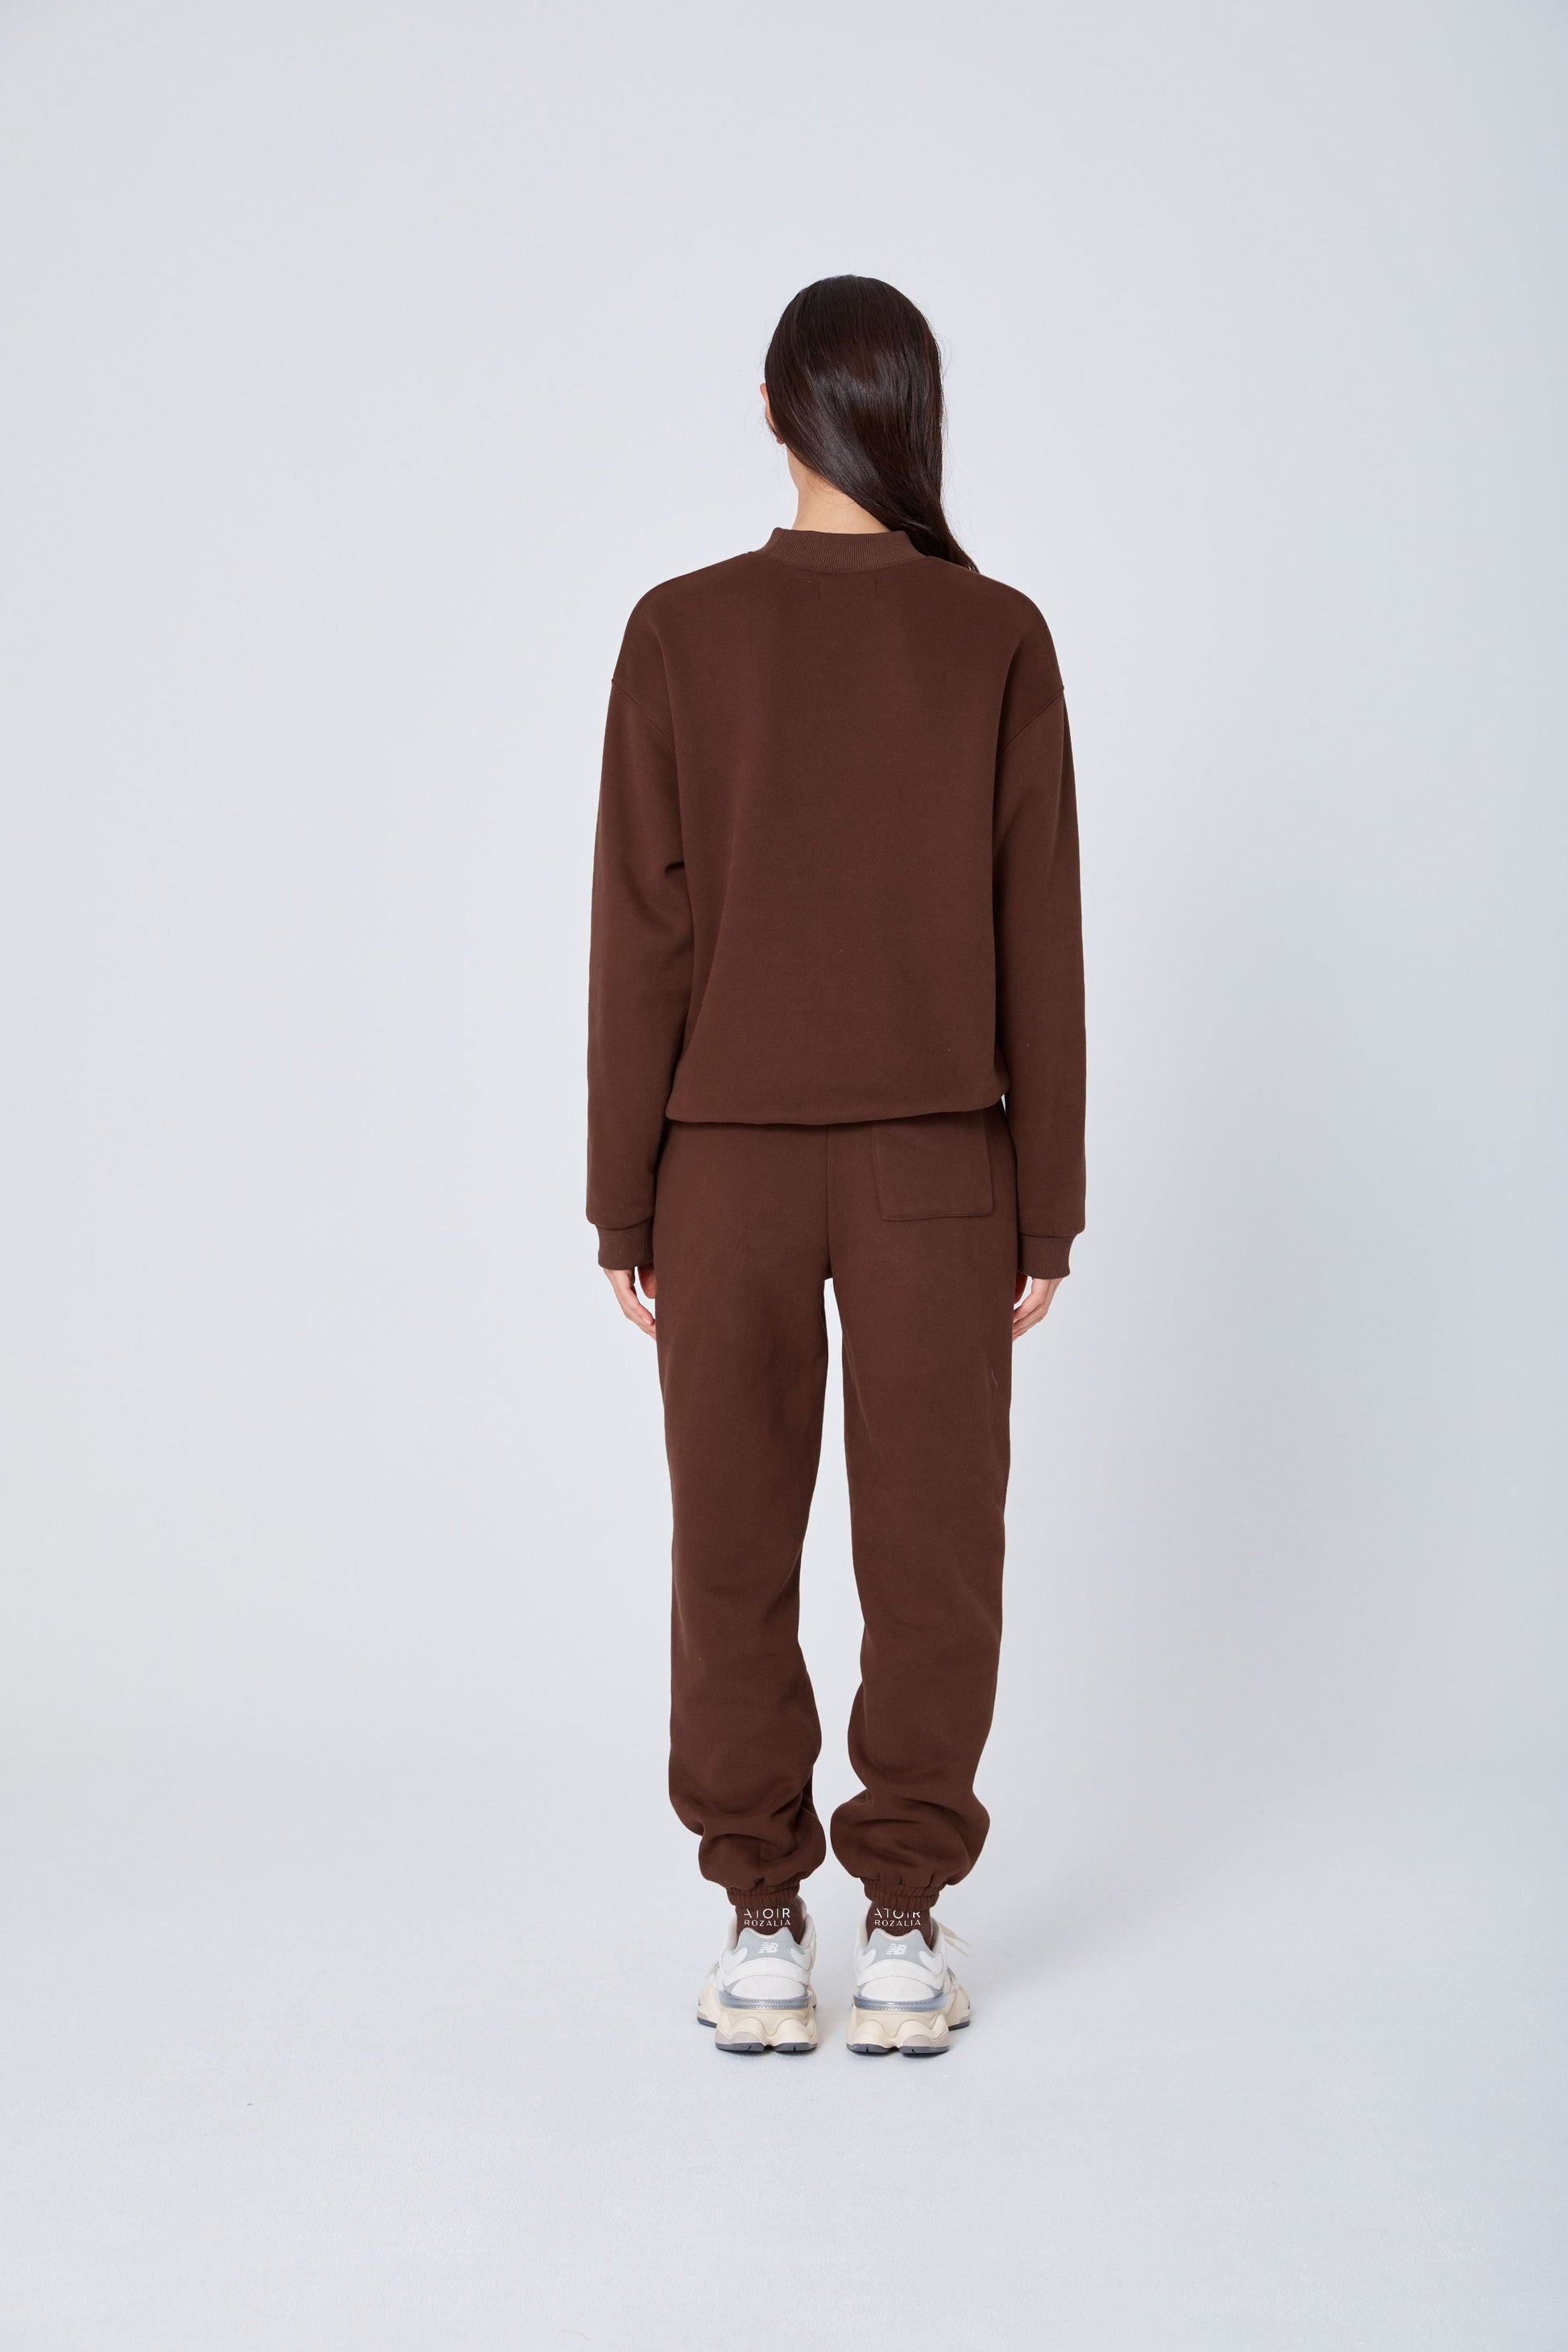 The Track Pant in Coco by Atoir X Rozalia Re Edition